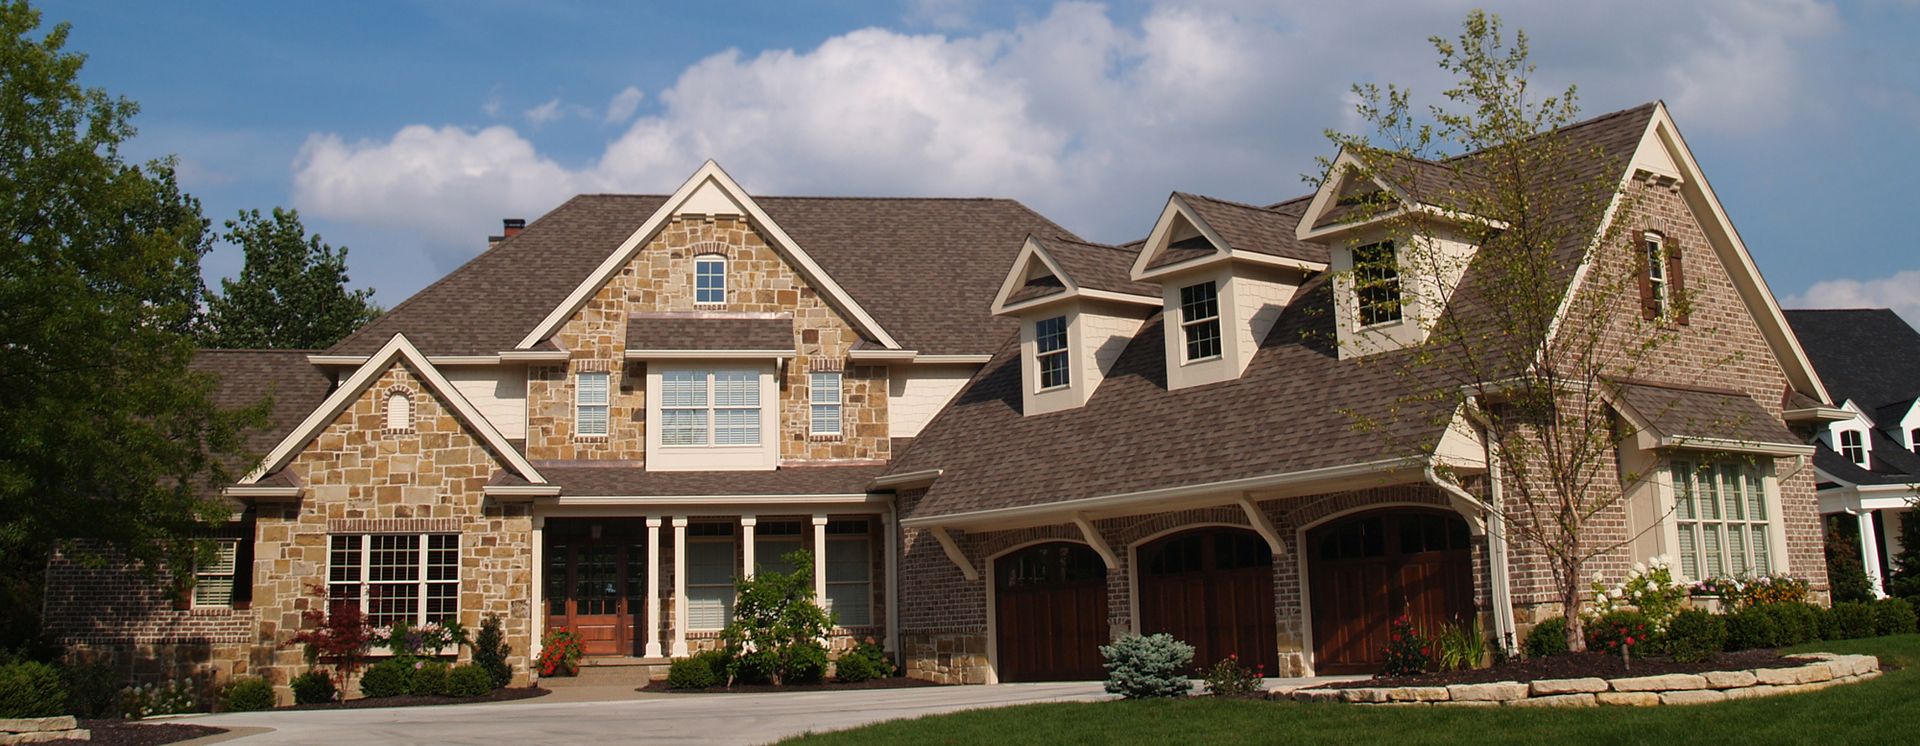 Fantastic roofing services by contractors in Moscow Mills, MO